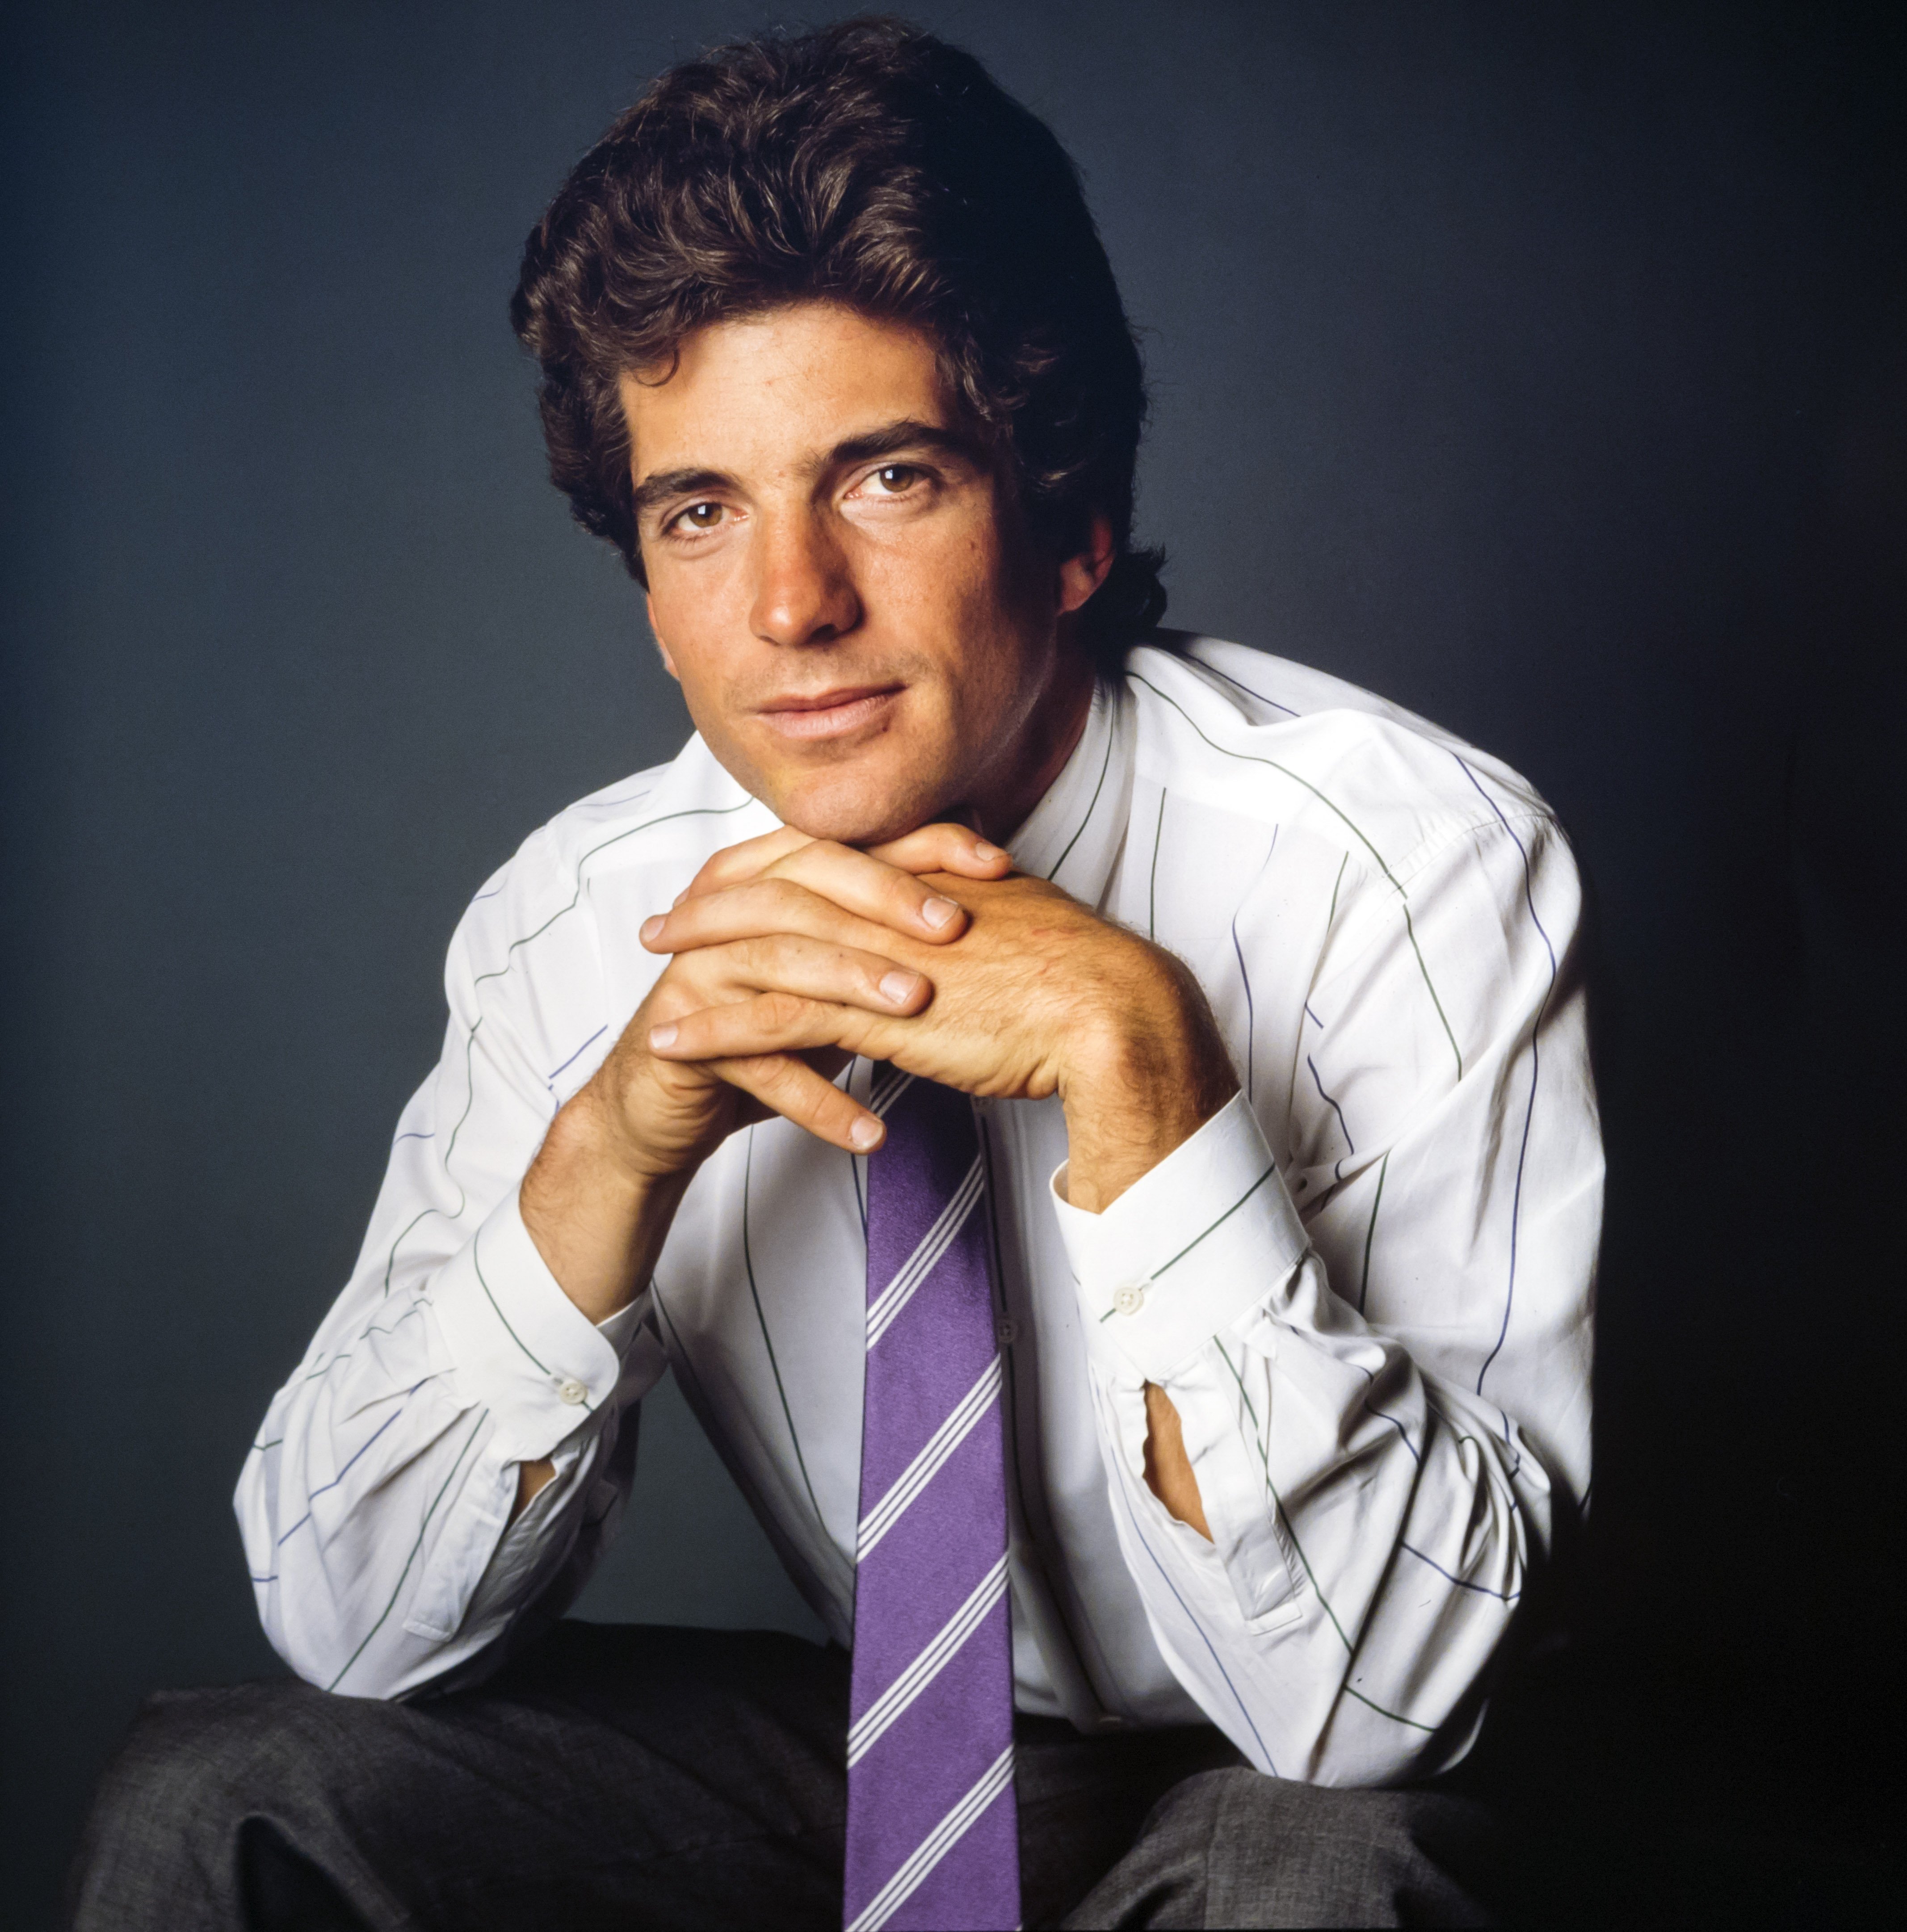 Studio portrait of American lawyer and magazine publisher John F Kennedy Jr., New York, 1988 | Photo: Getty Images